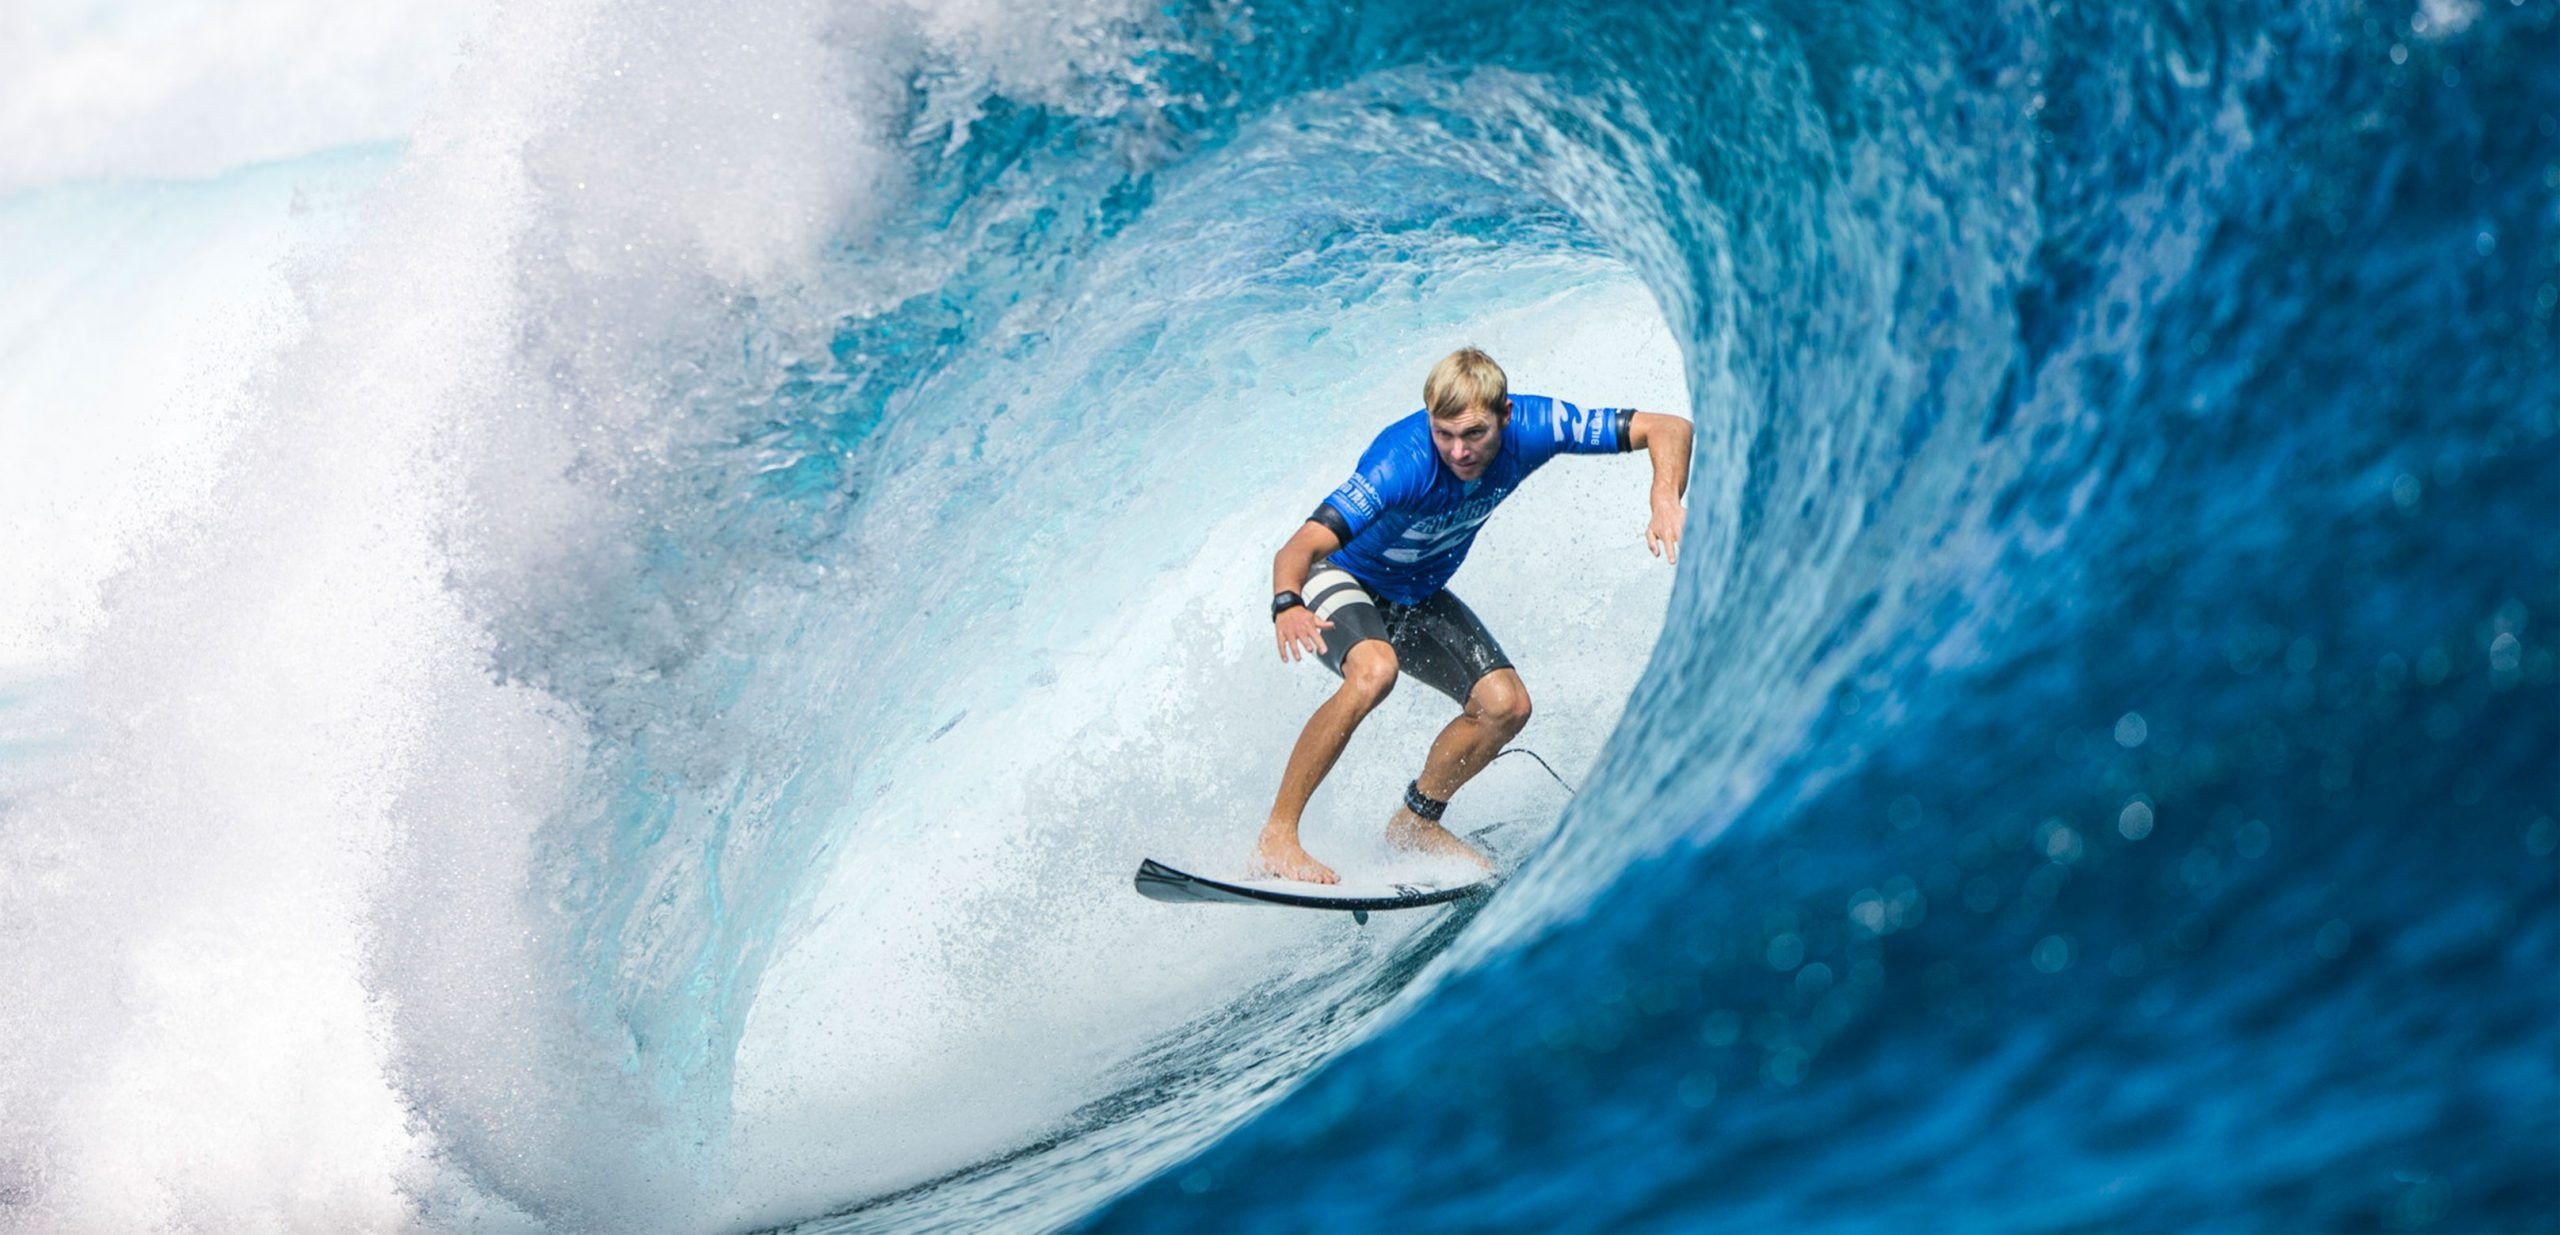 Surfing: World Surf League athlete in French Polynesia, The island of Tahiti. 2560x1240 Dual Screen Background.